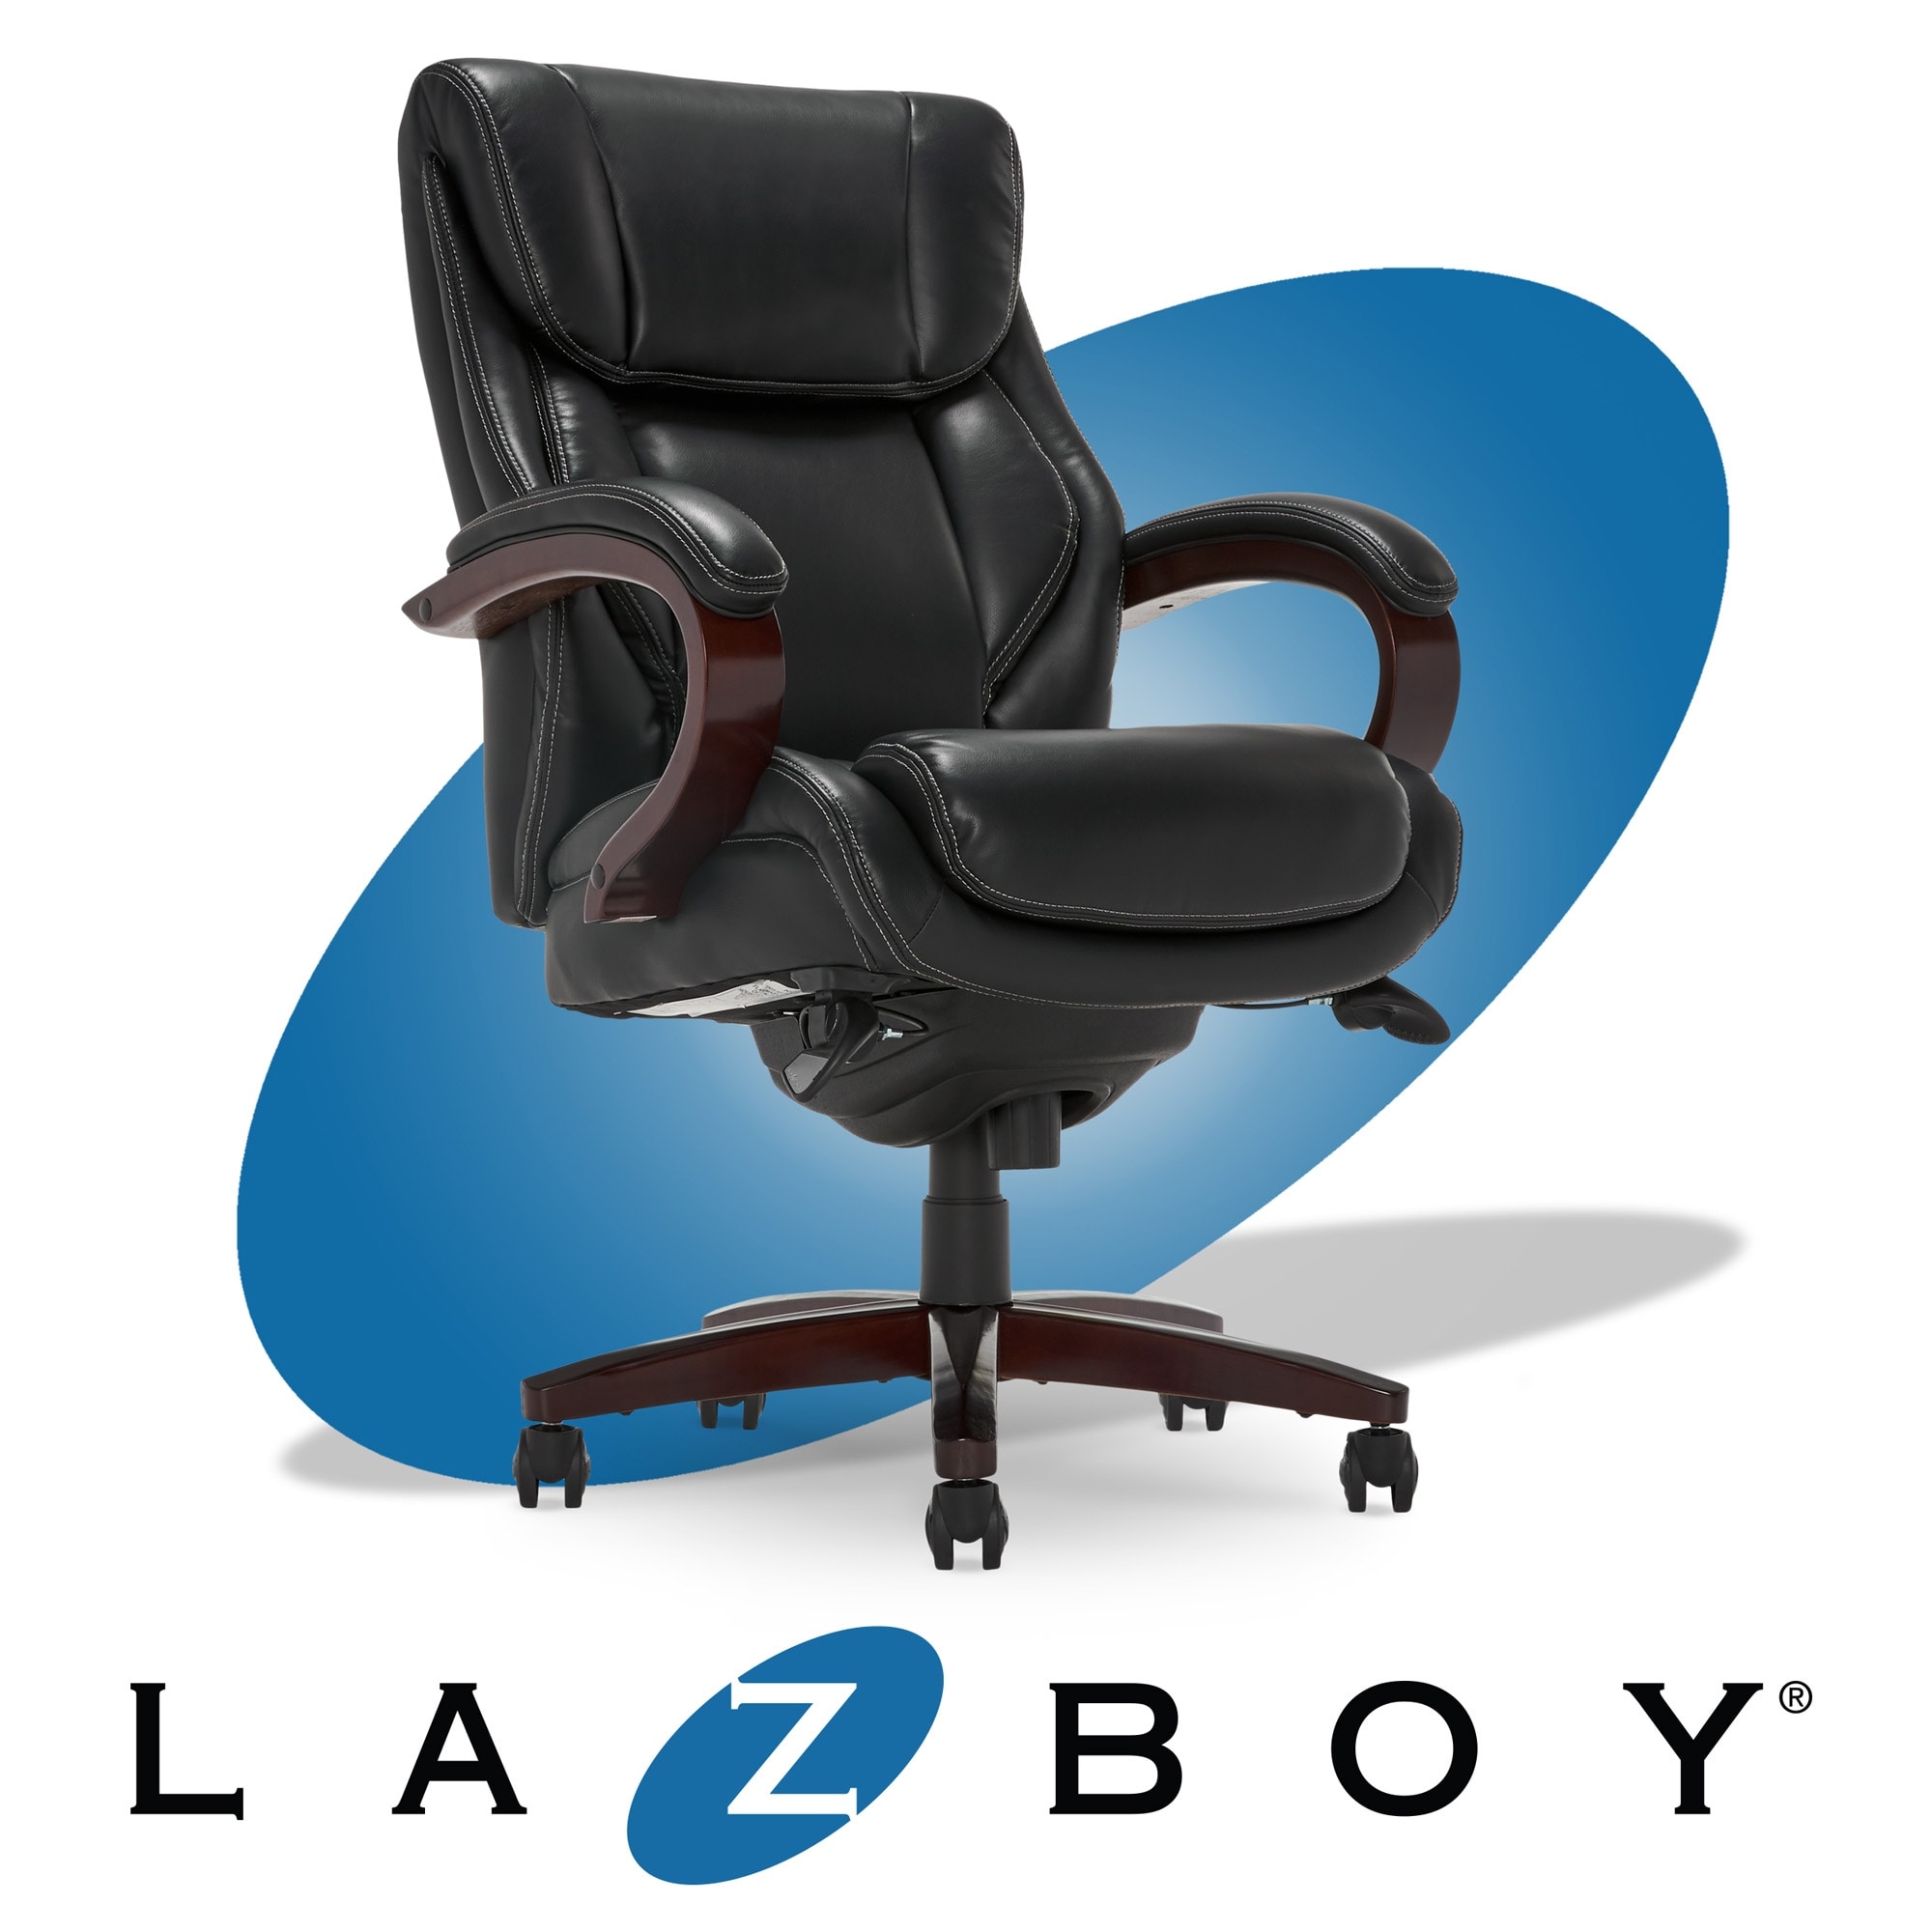 https://ak1.ostkcdn.com/images/products/is/images/direct/72df1d32cbdc44cb64041b7130c27c02ffe7b5e7/La-Z-Boy-Bellamy-Executive-Leather-Office-Chair-with-Memory-Foam-Cushions%2C-Solid-Wood-Arms-and-Base%2C-Waterfall-Seat-Edge.jpg